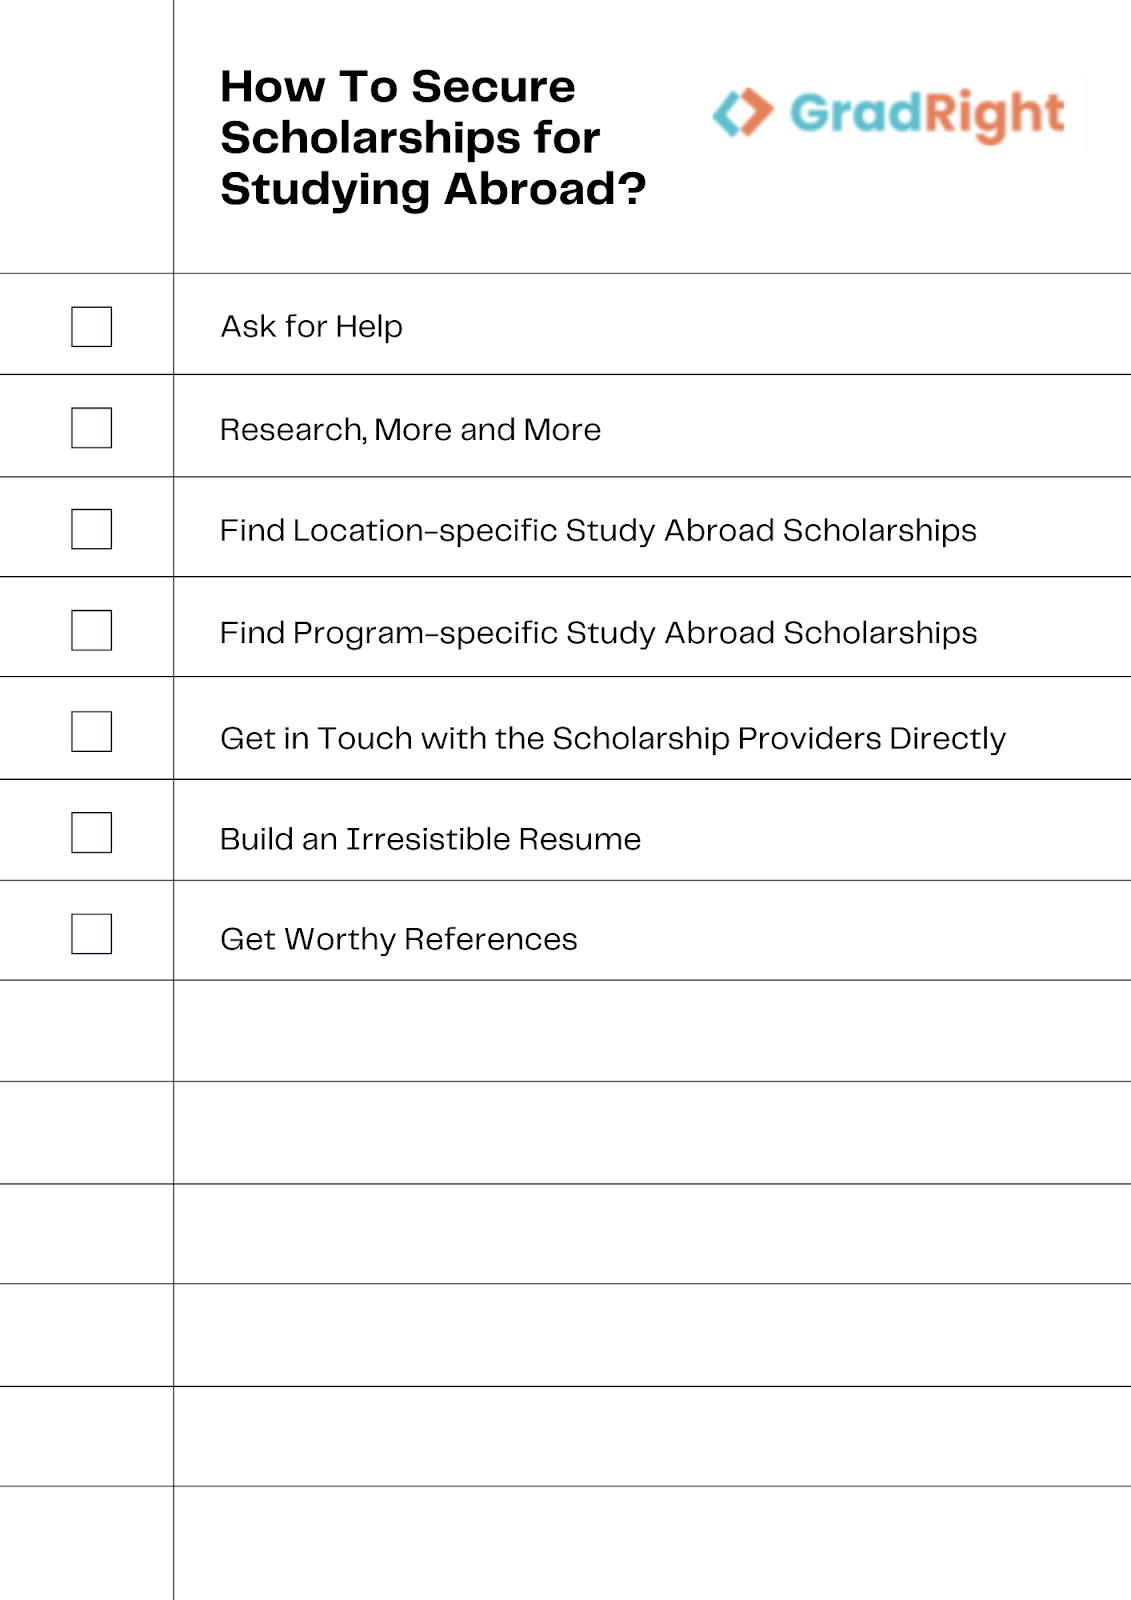 Other Financial Aid Options